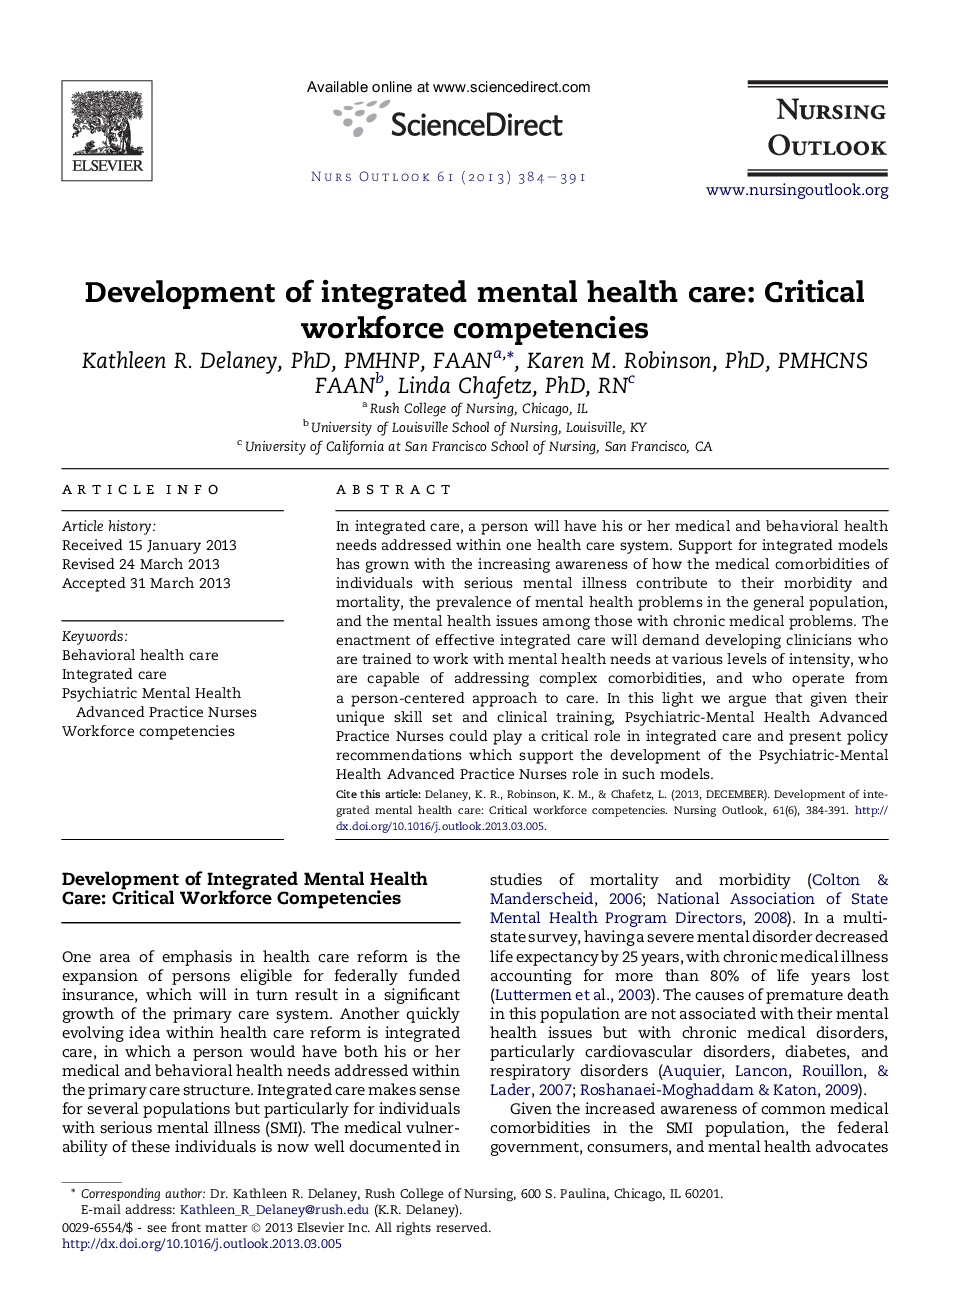 Development of integrated mental health care: Critical workforce competencies